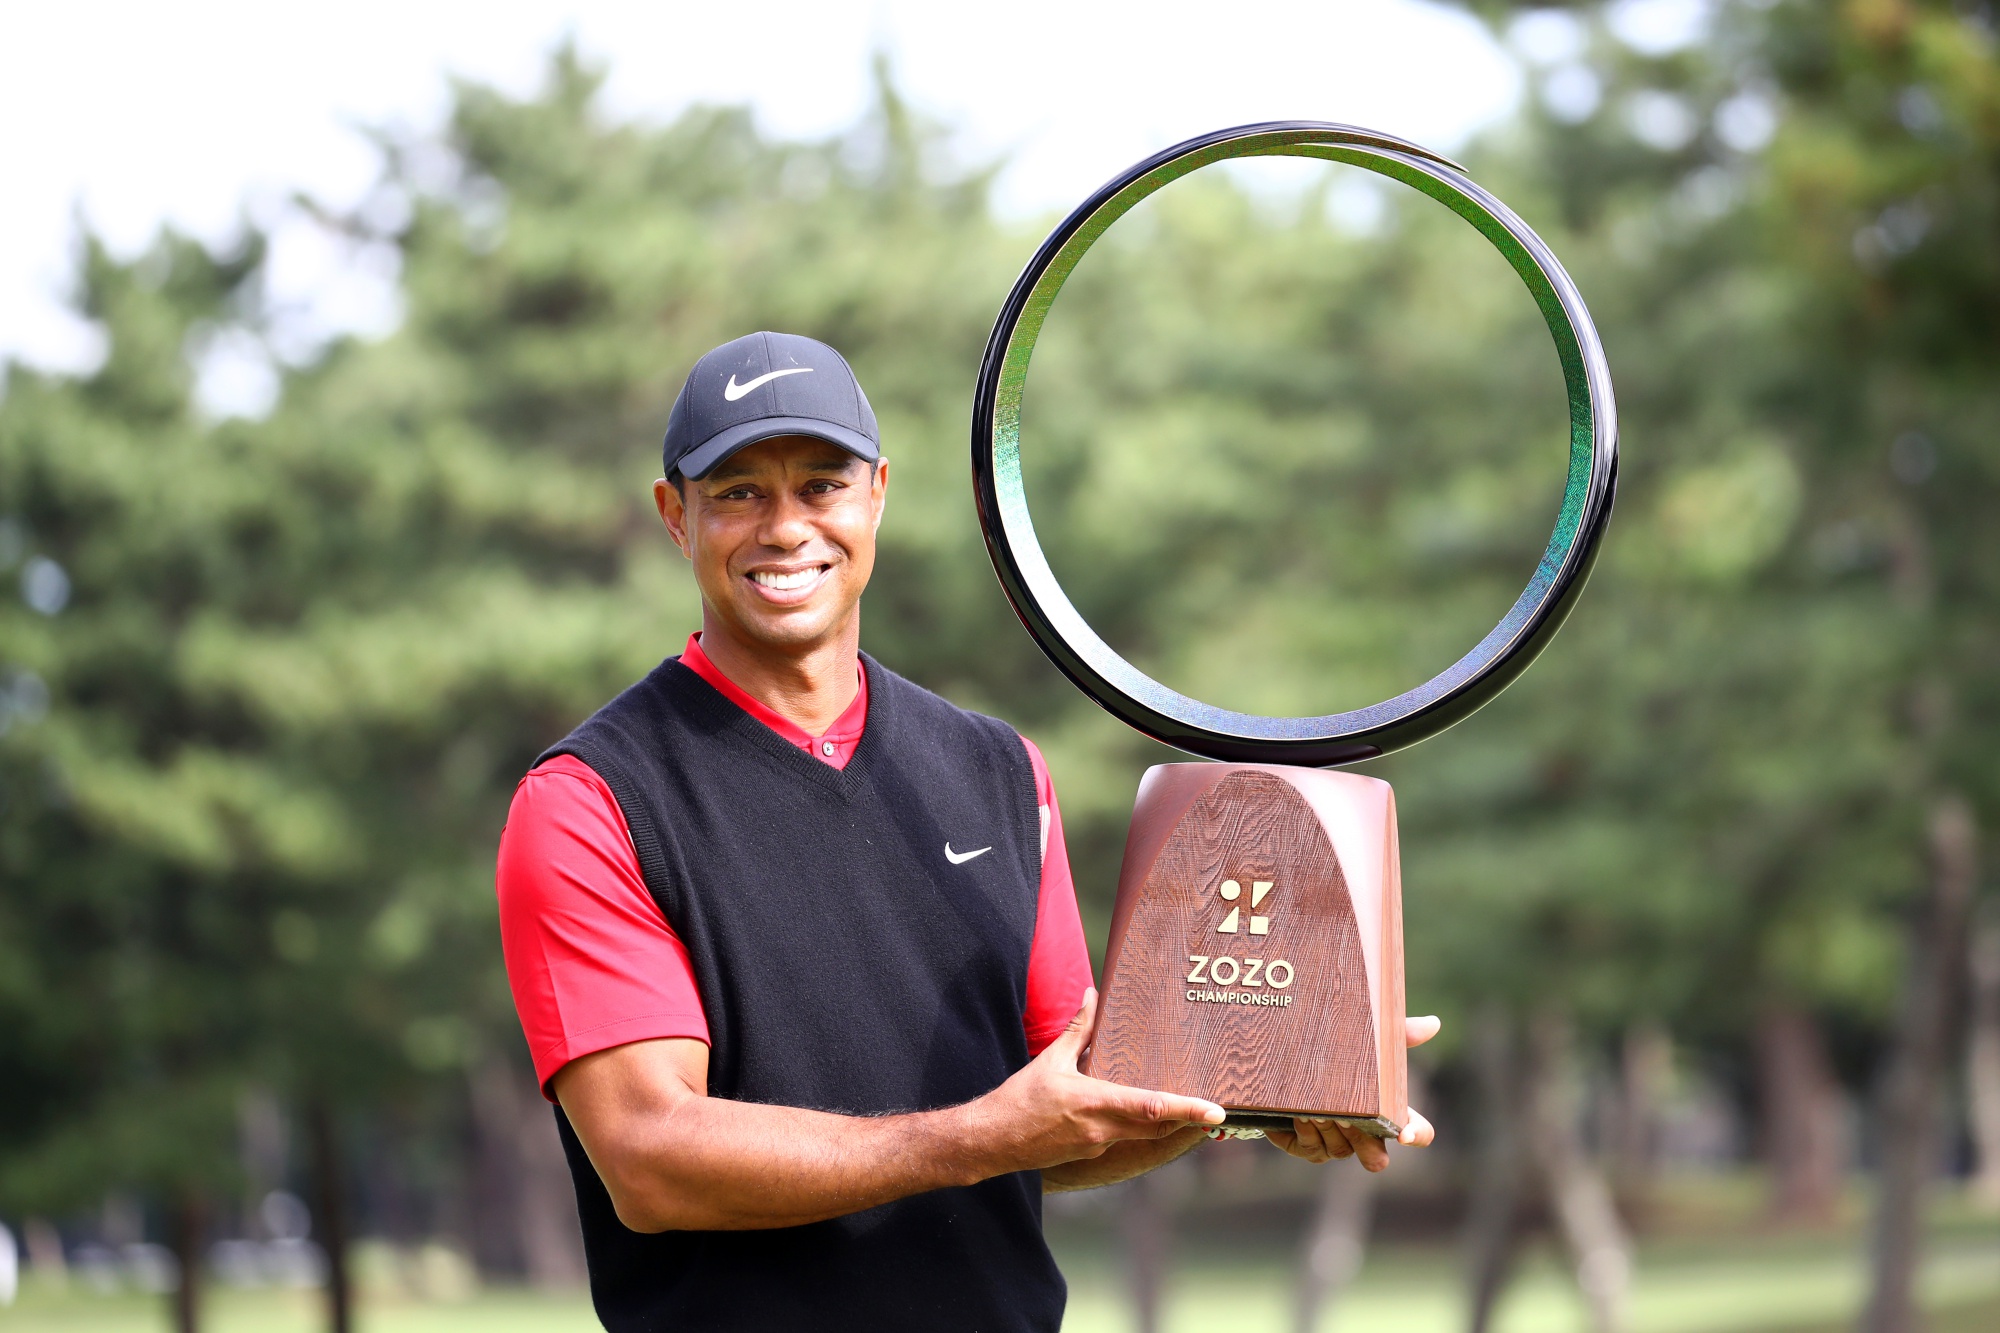 Tiger Woods Ties Sam Sneads Record of 82 PGA Tour Wins